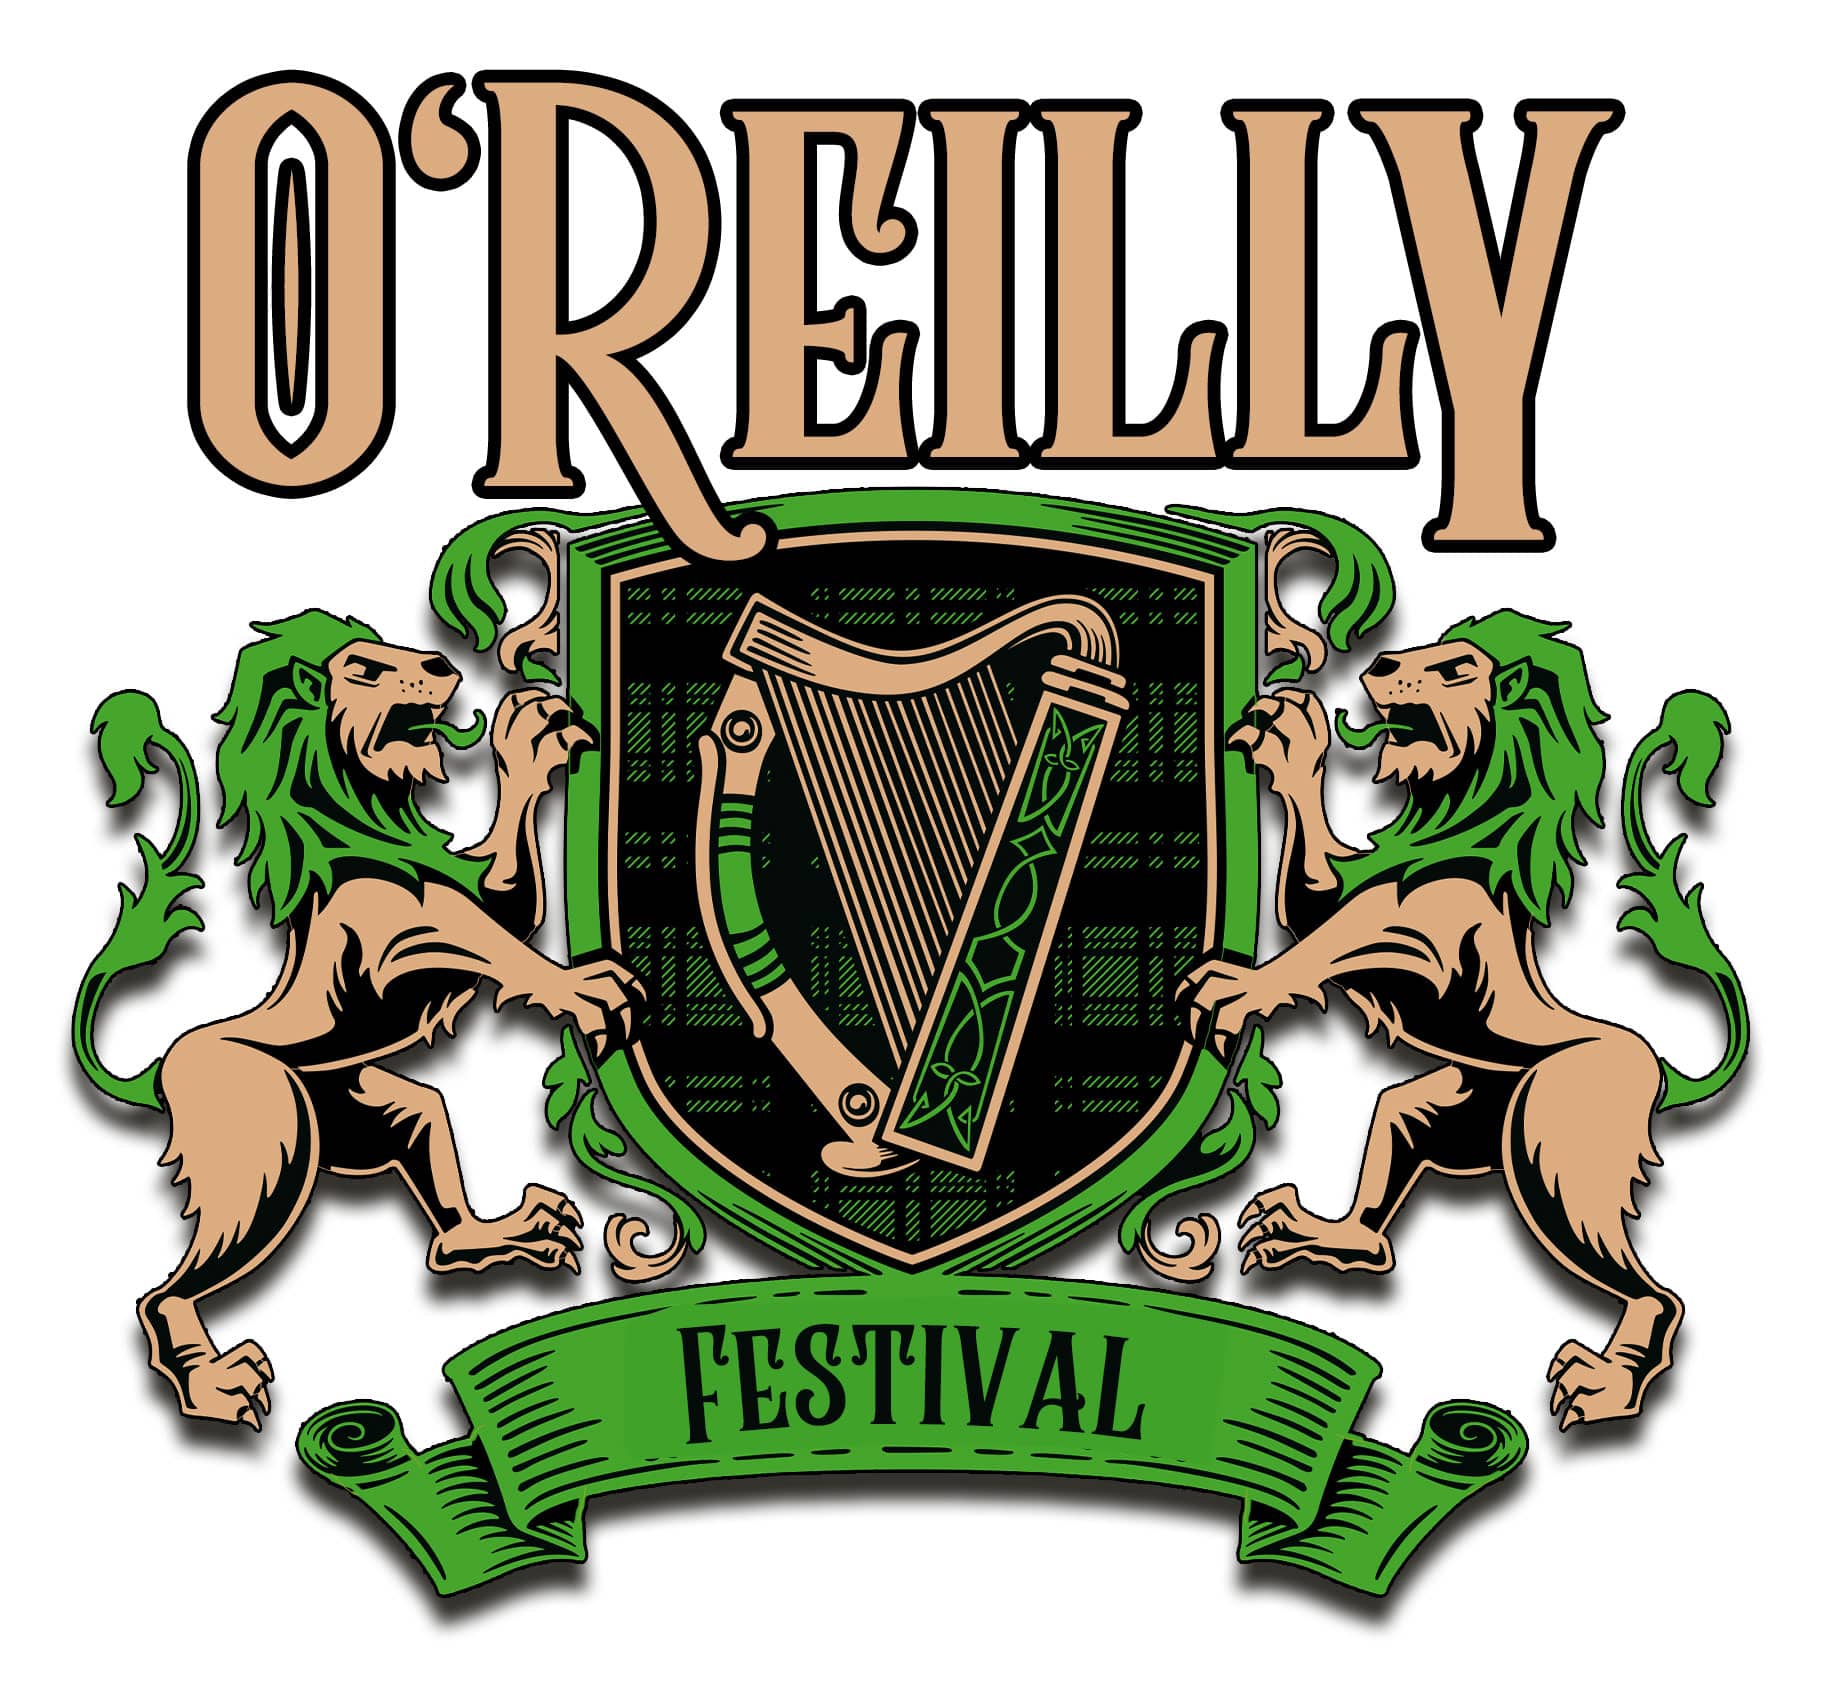 News: O’Reilly Festival 2022 will take place